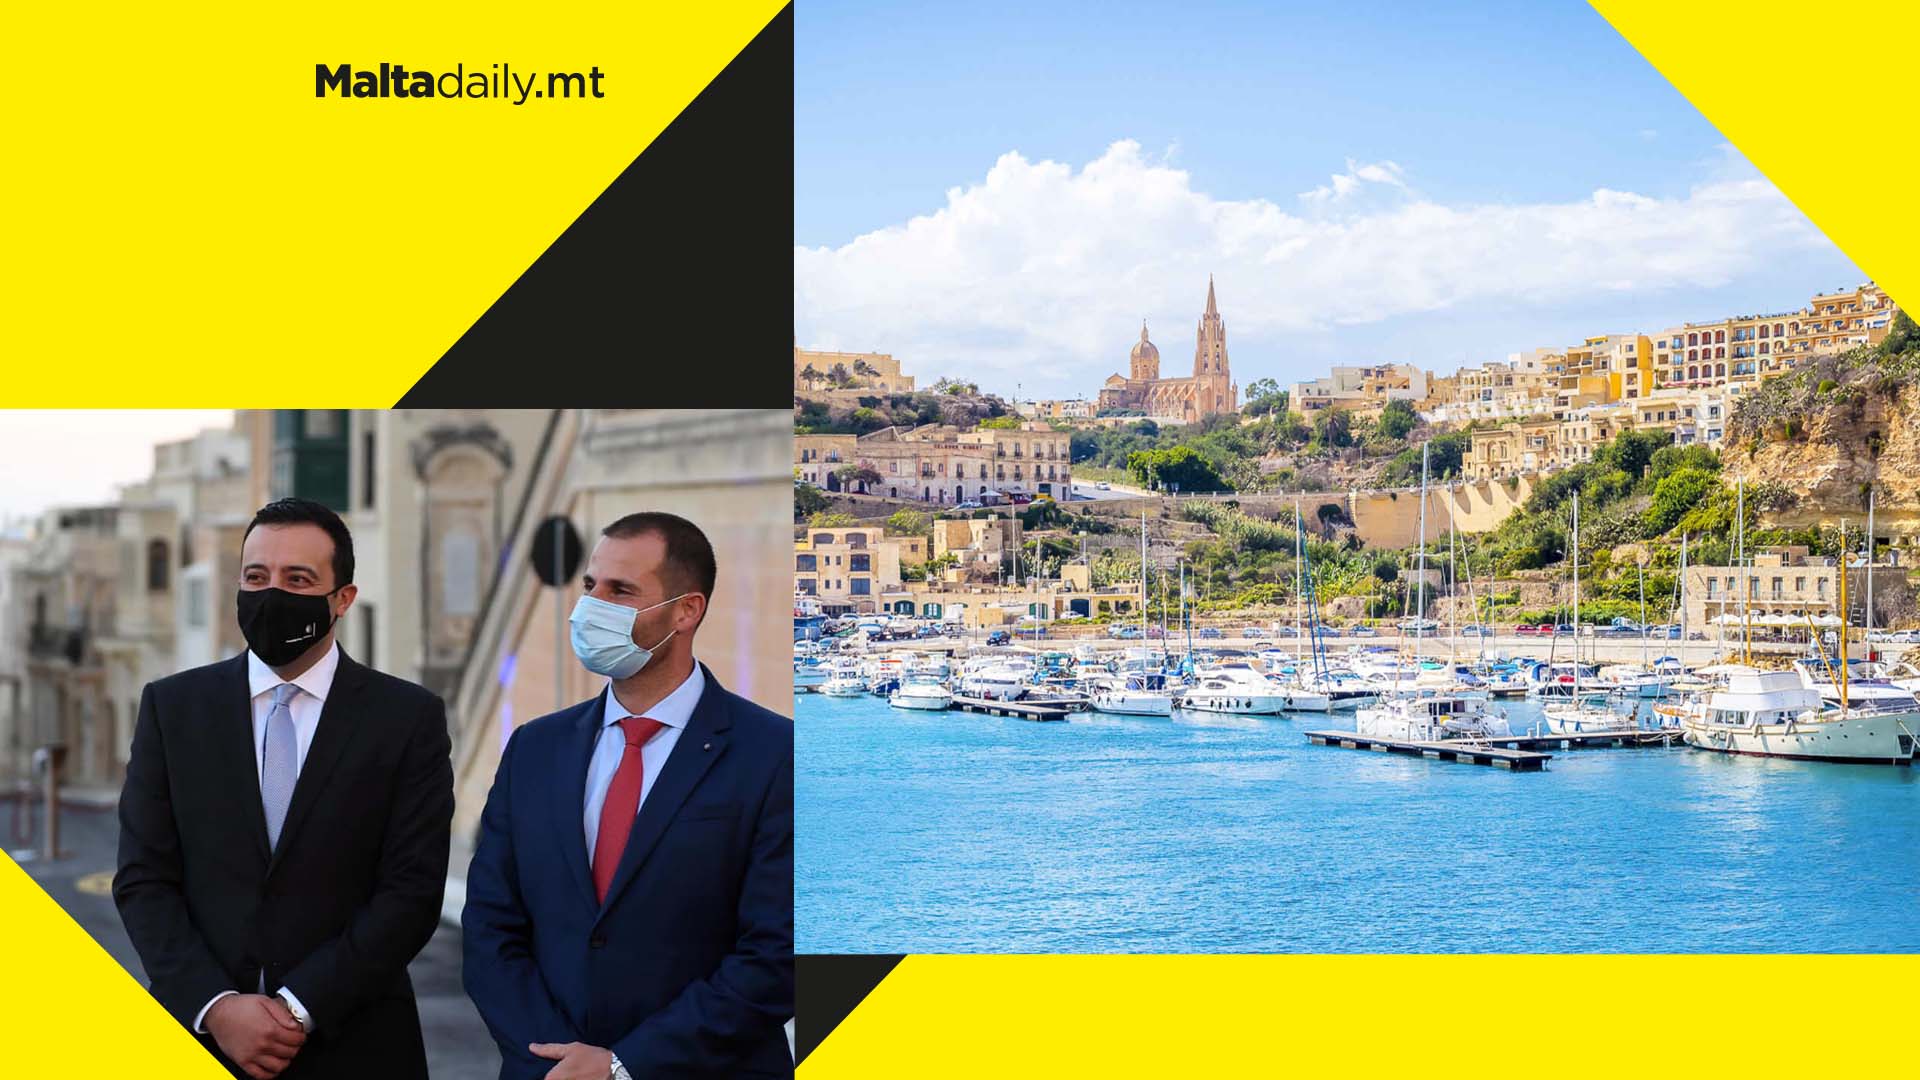 Gozo will be featuring prominently in PL’s 1000 proposals says Minister